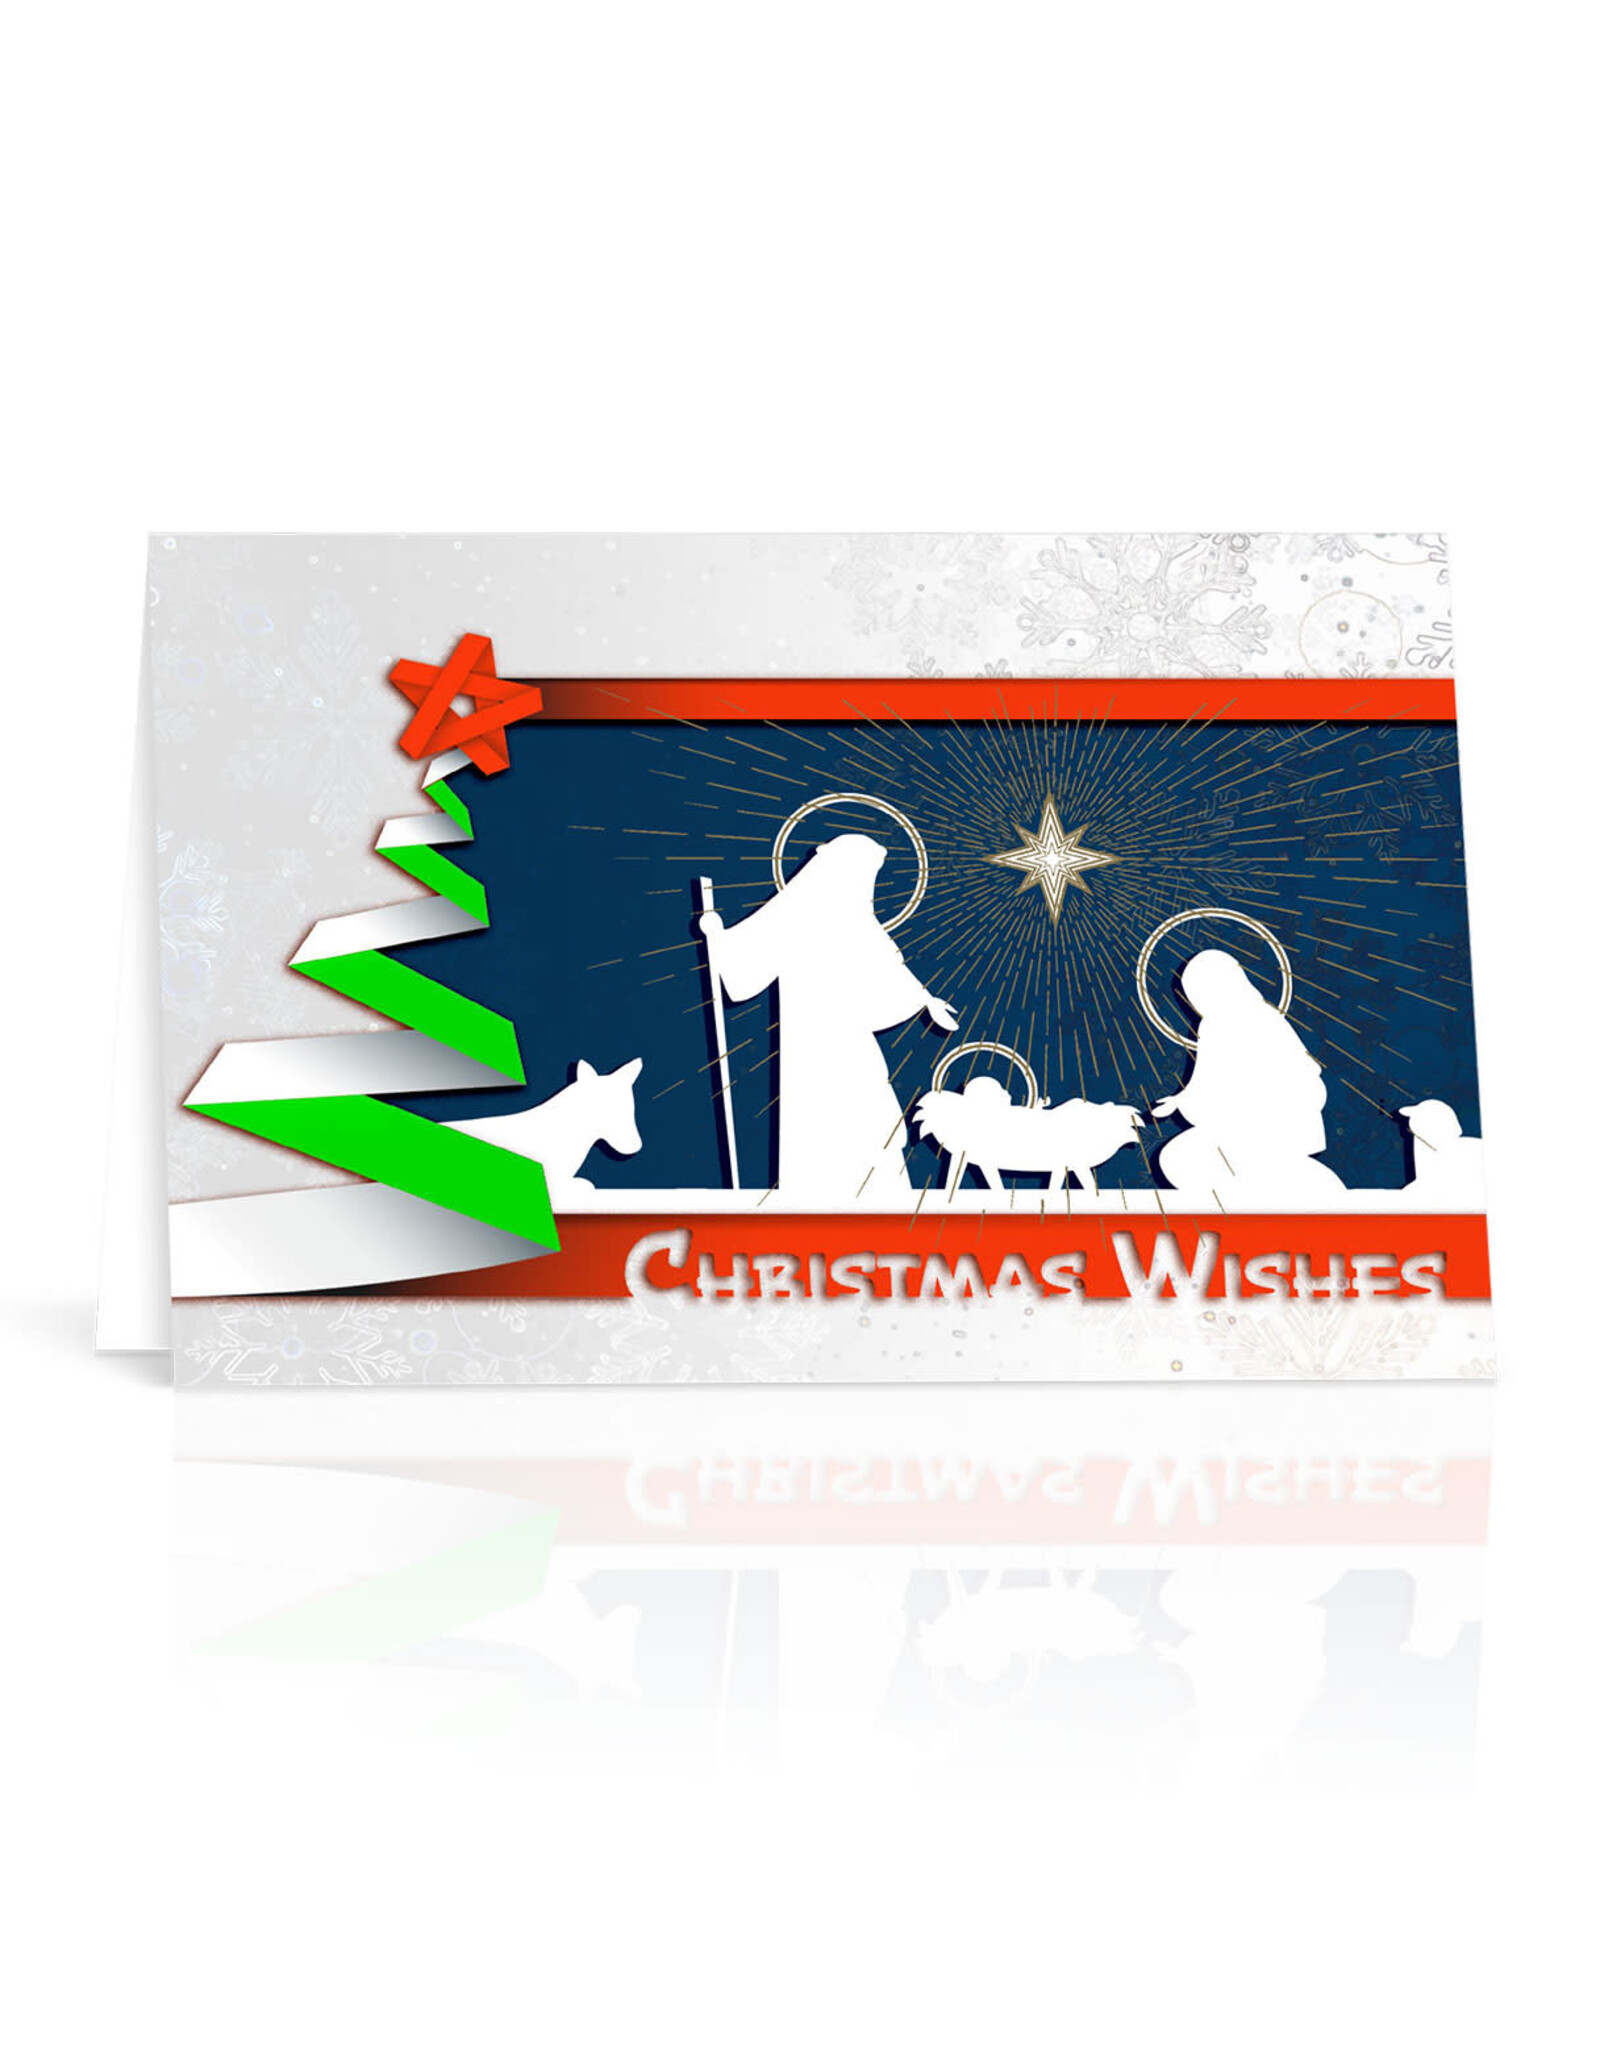 Bonella Holy Family Silhouette Christmas Card